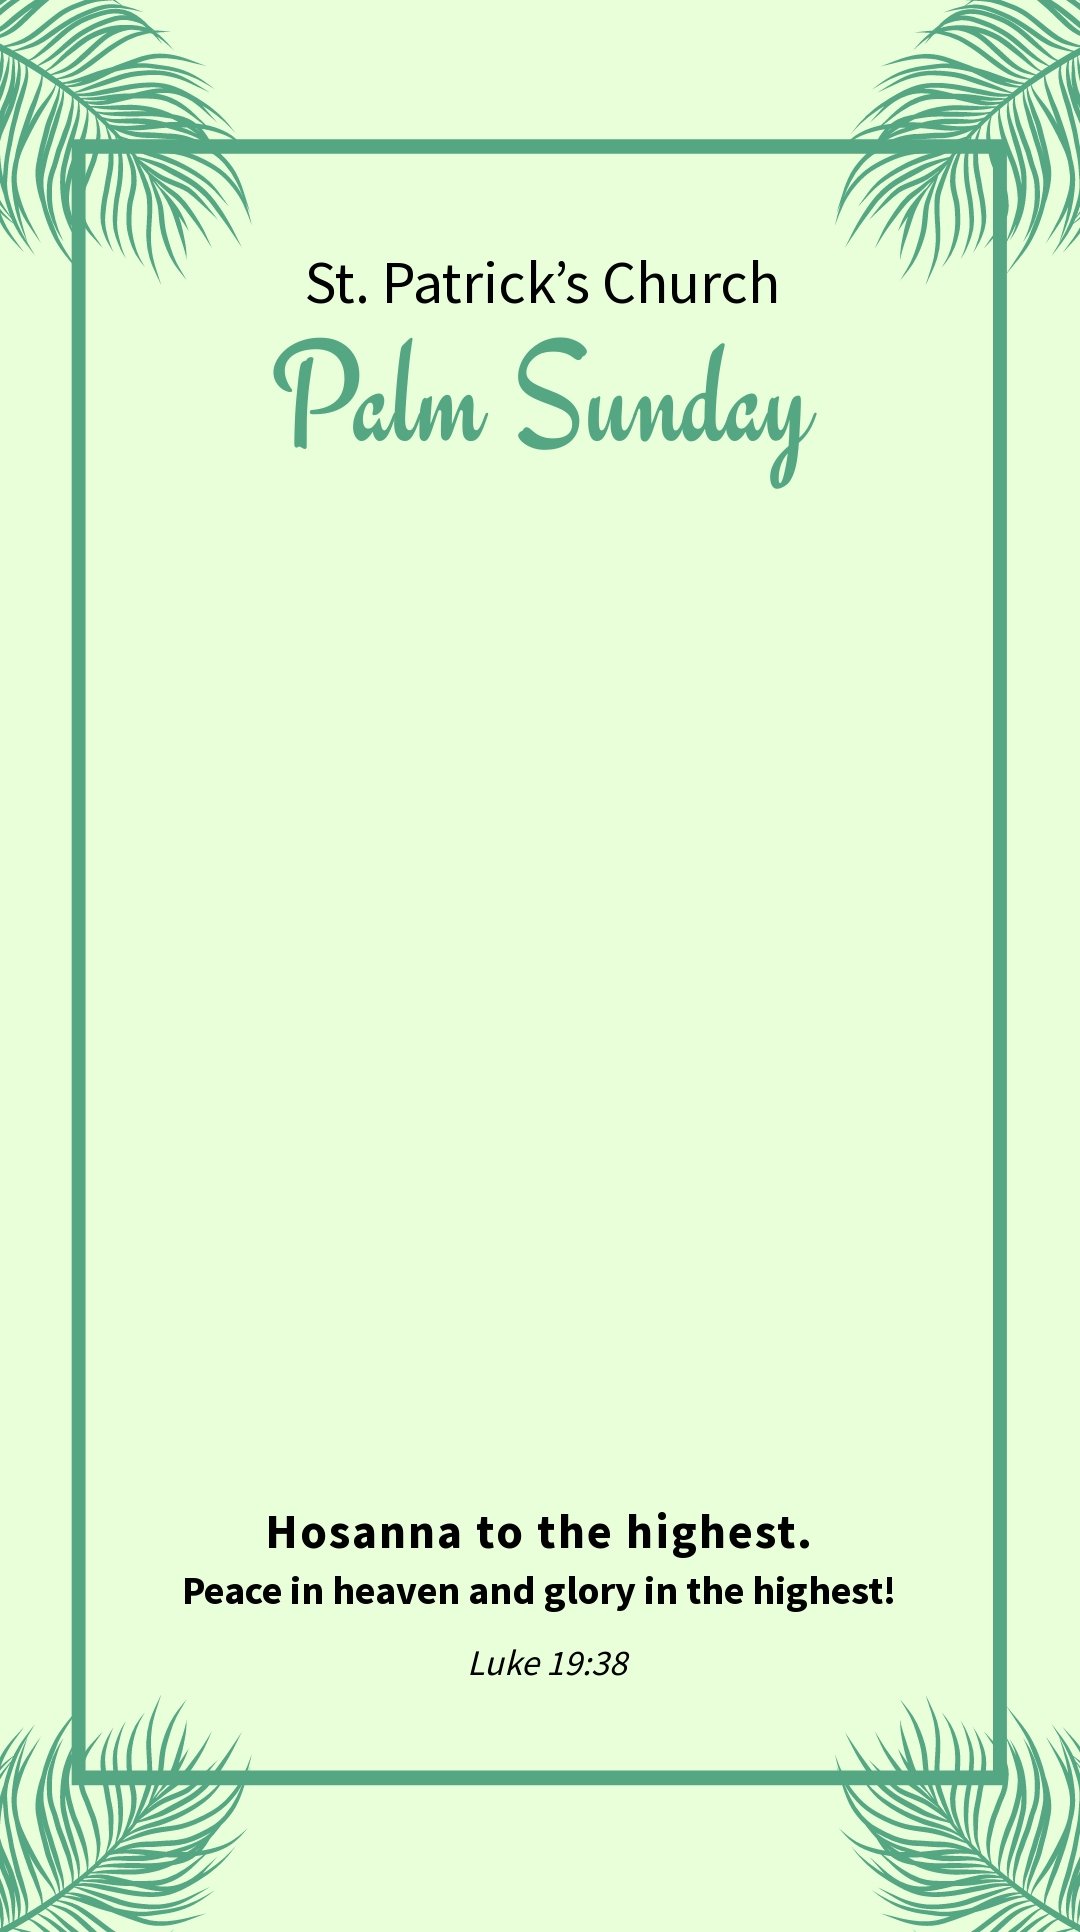 Free Palm Sunday Quote Snapchat Geofilter Template